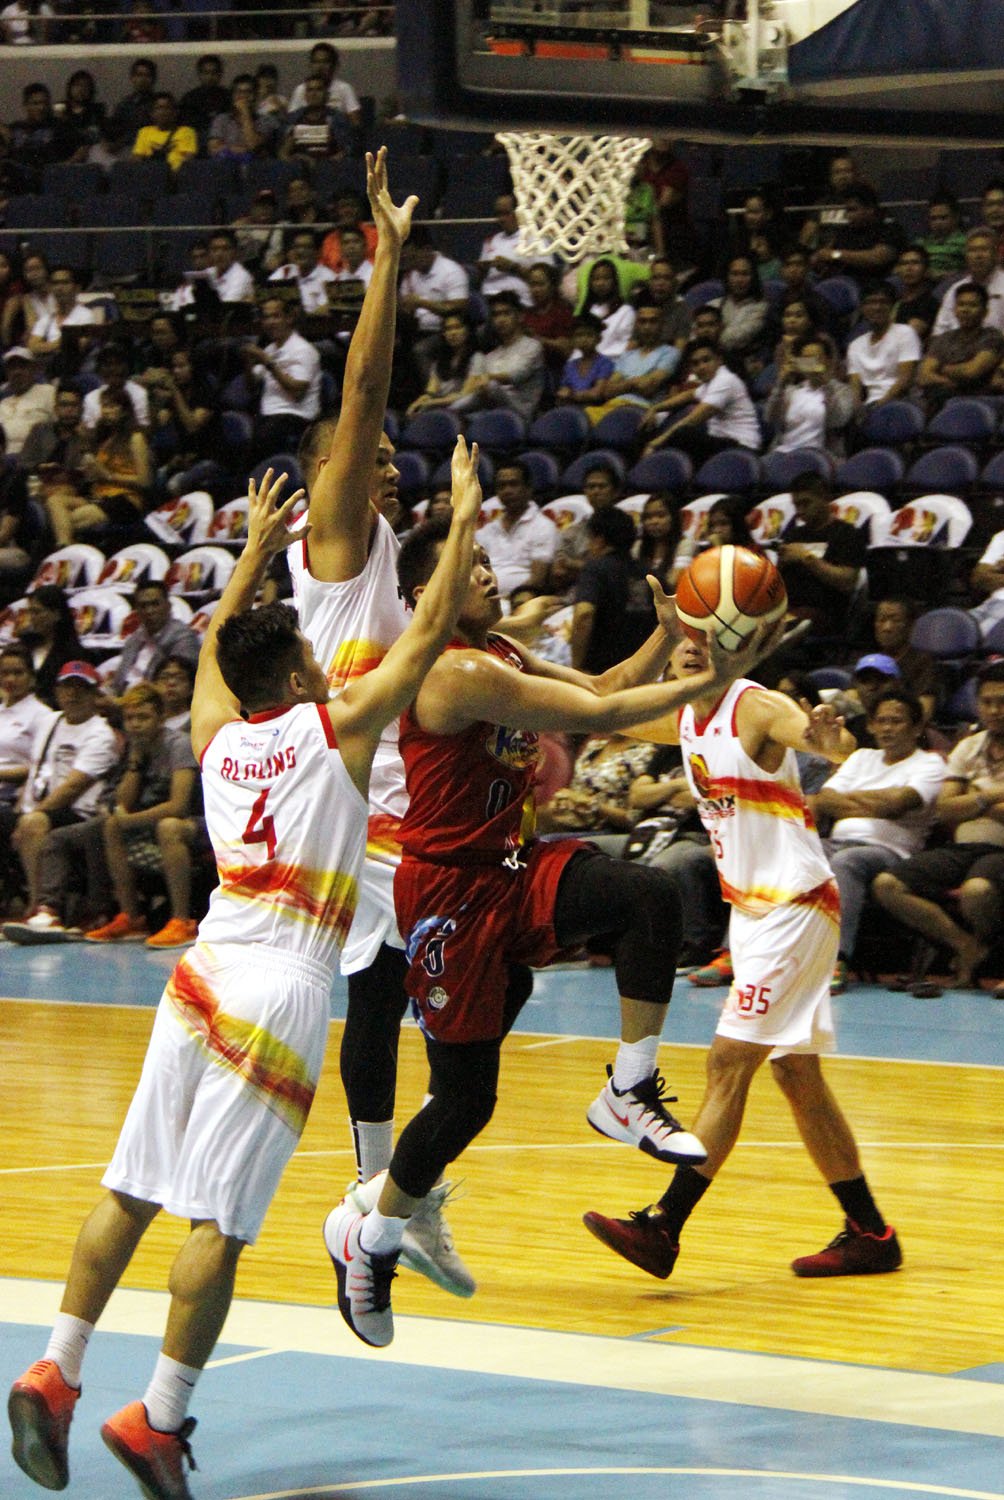 ROS rookie Tolomia tries to score over PHX defenders